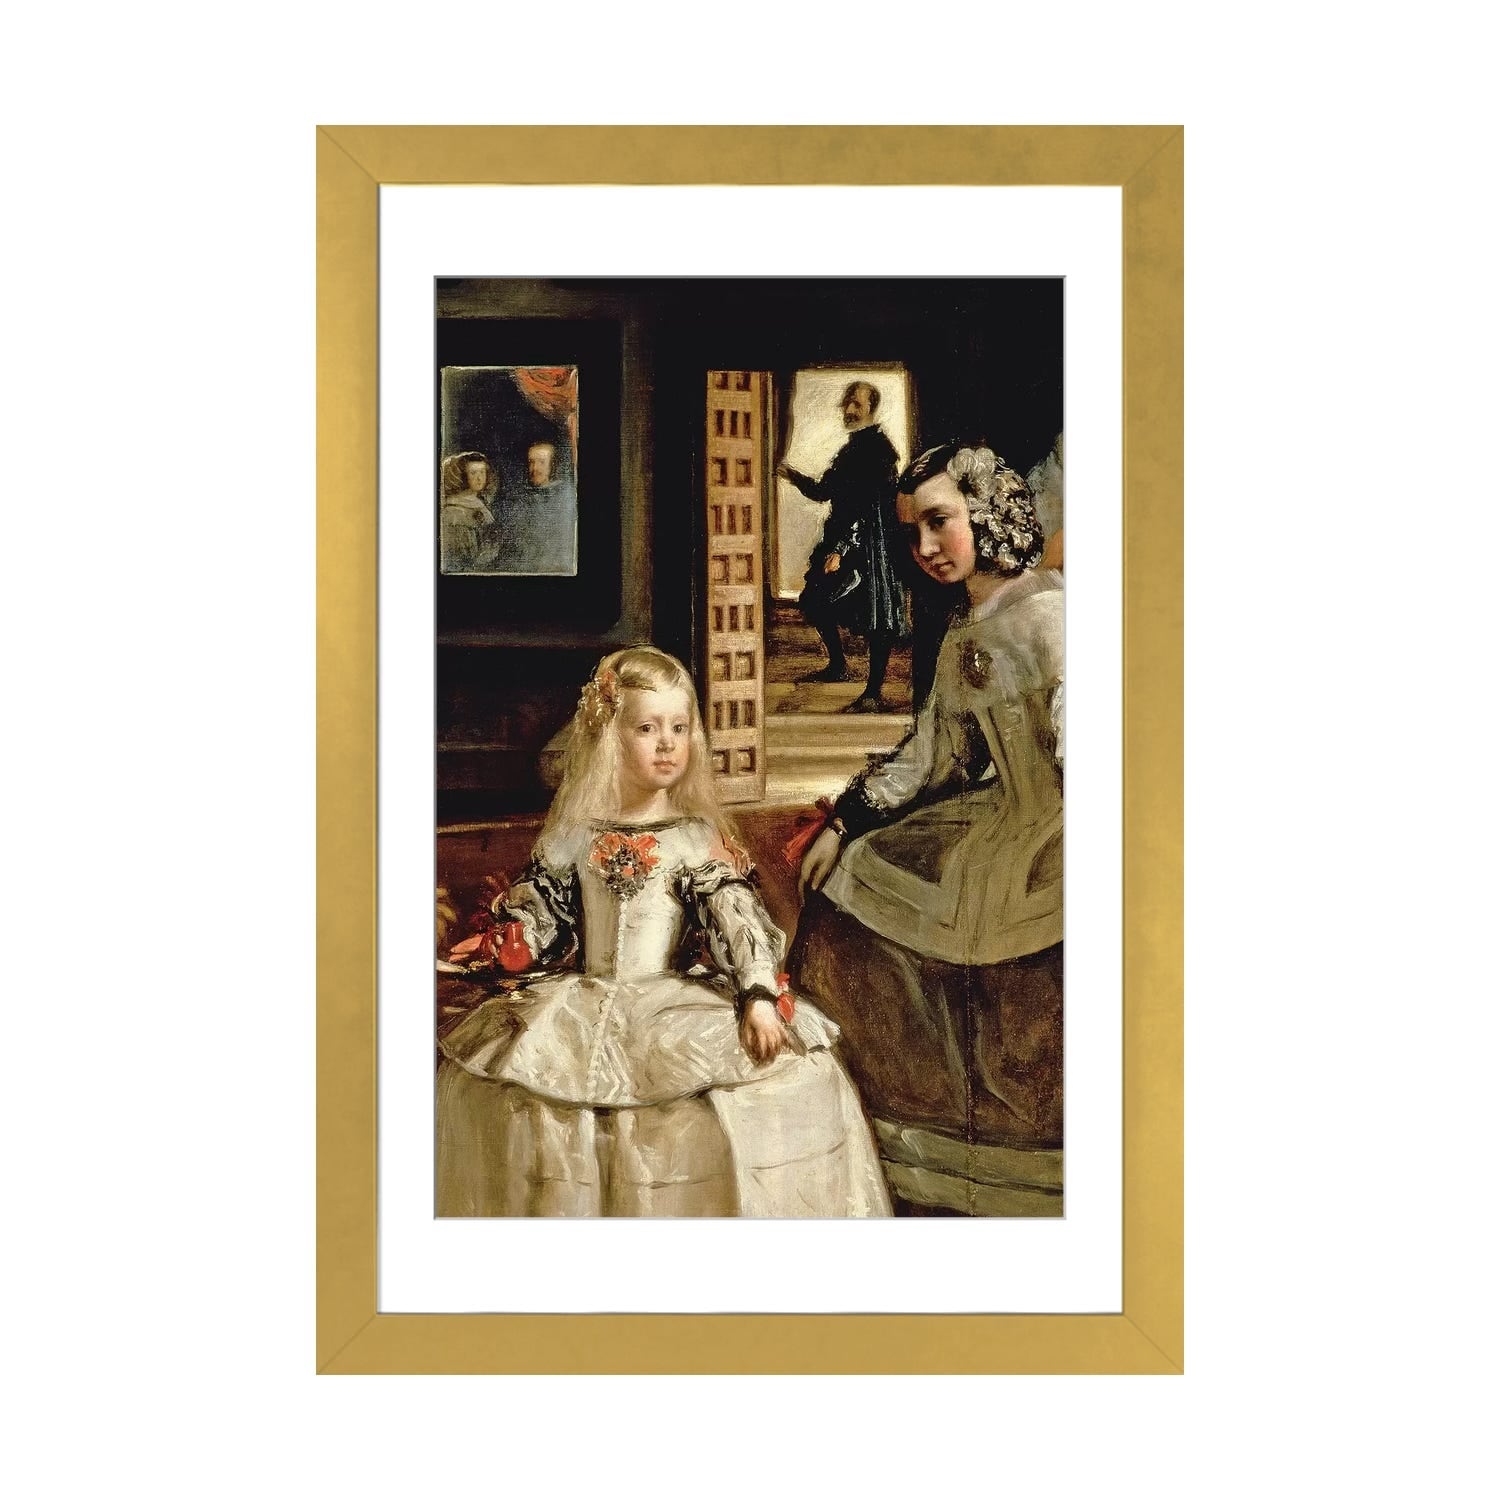 Print of the Handmade Collage Based on Las Meninas by Velázquez. Print of  the Handmade Collage Based on Las Meninas by Velázquez. 